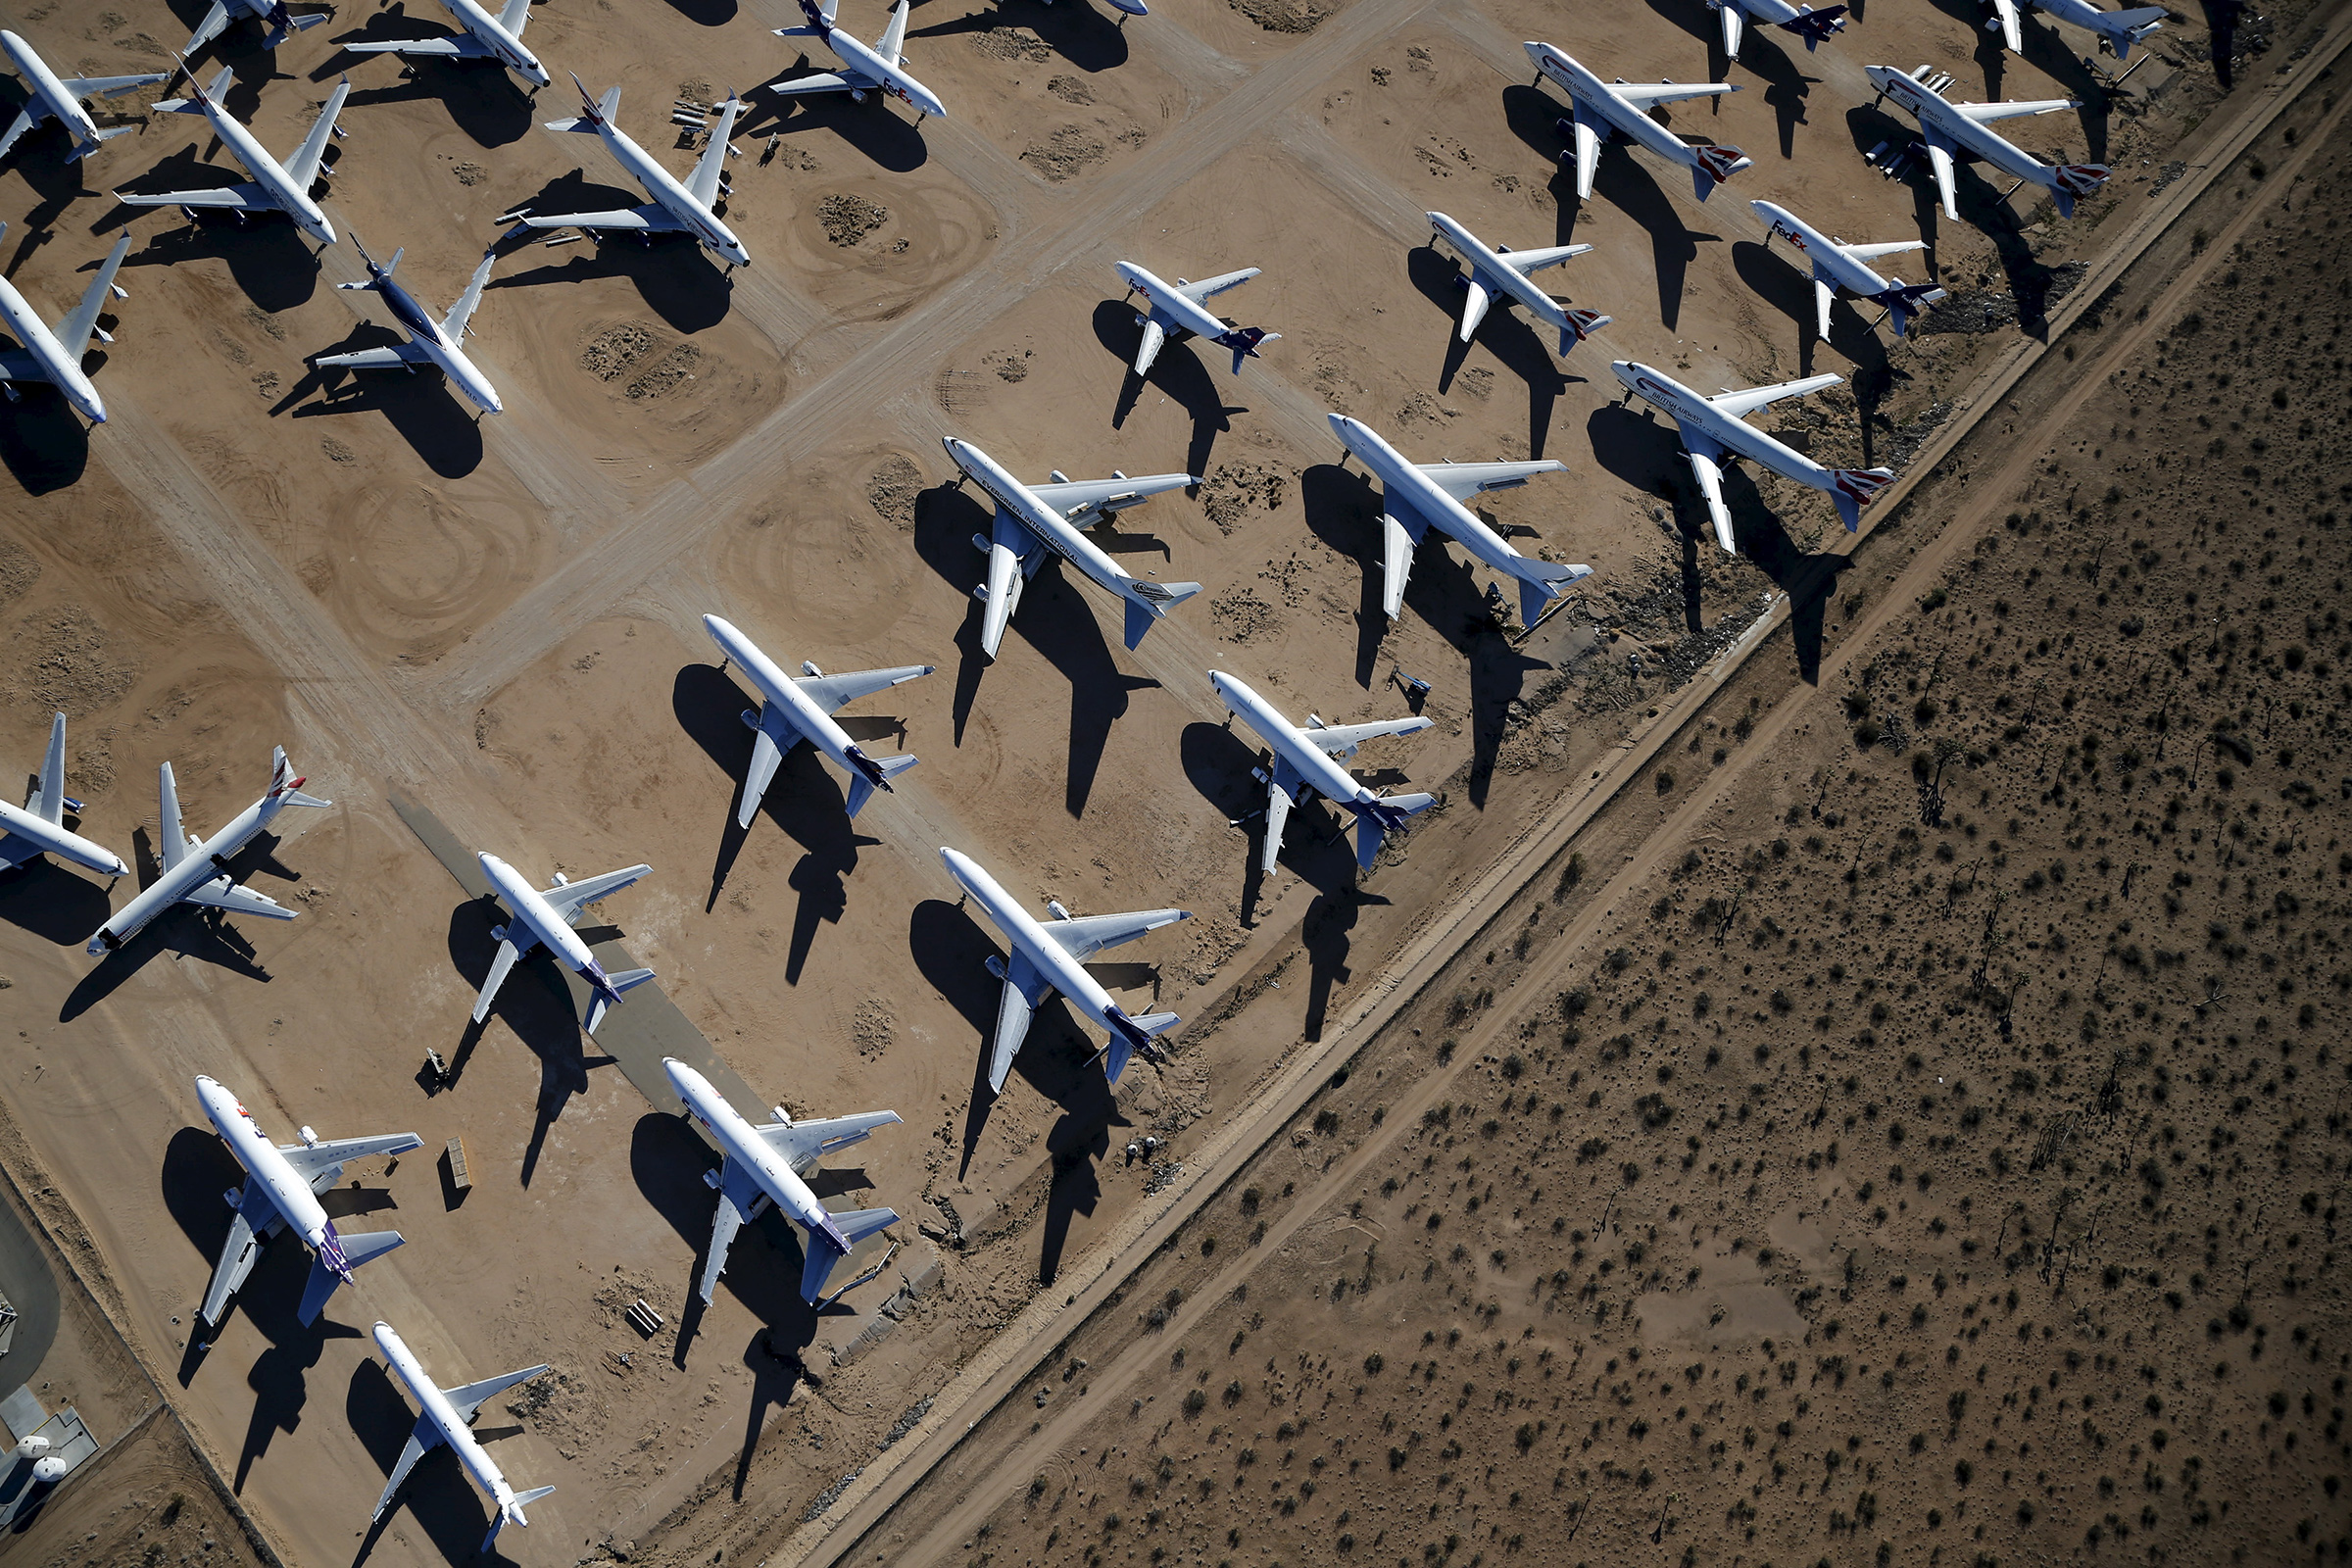 Old airplanes, including Boeing 747-400s, are stored in the desert in Victorville, California March 13, 2015. In the last year, there were zero orders placed by commercial airlines for new Boeing 747s or Airbus A380s, reflecting a fundamental shift in the industry toward smaller, twin-engine planes. (Lucy Nicholson—Reuters)